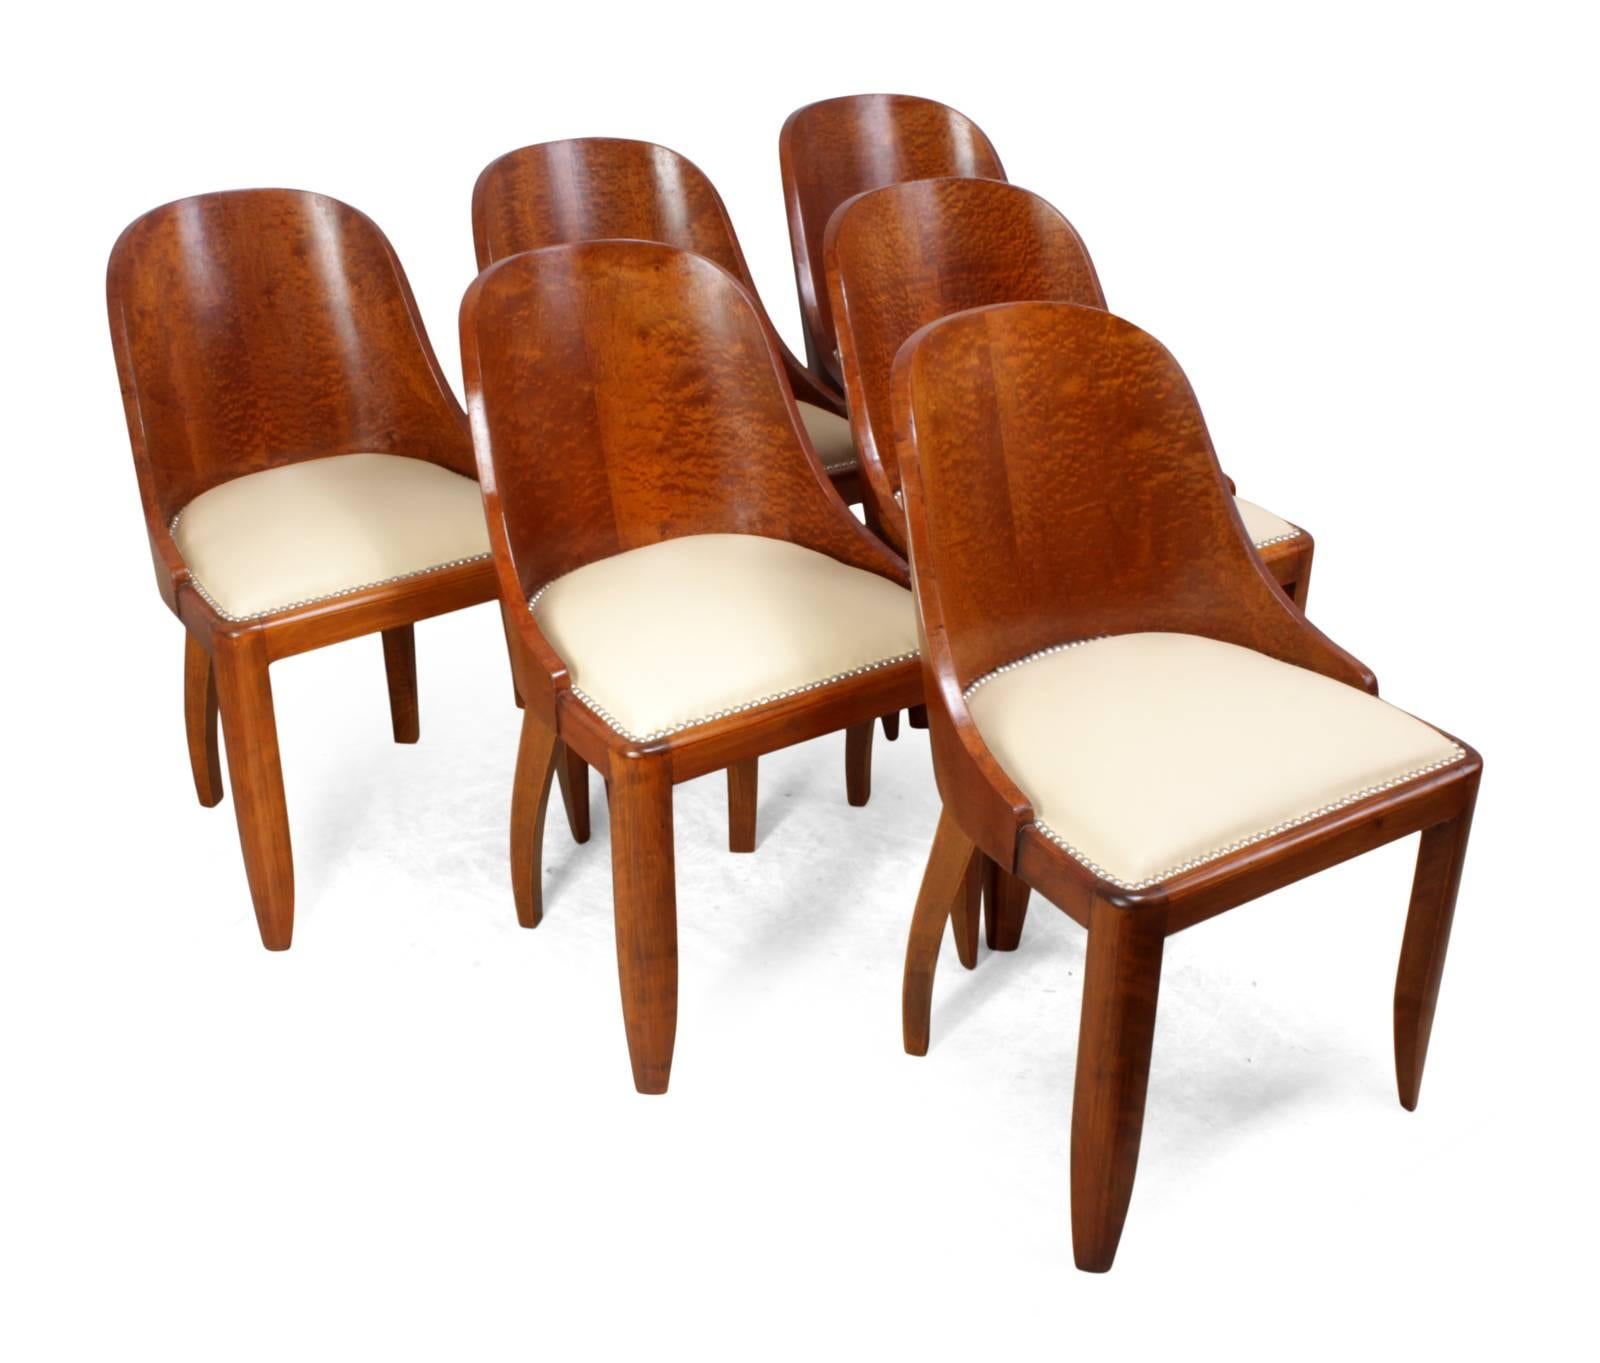 Early 20th Century French Art Deco Dining Chairs, circa 1920